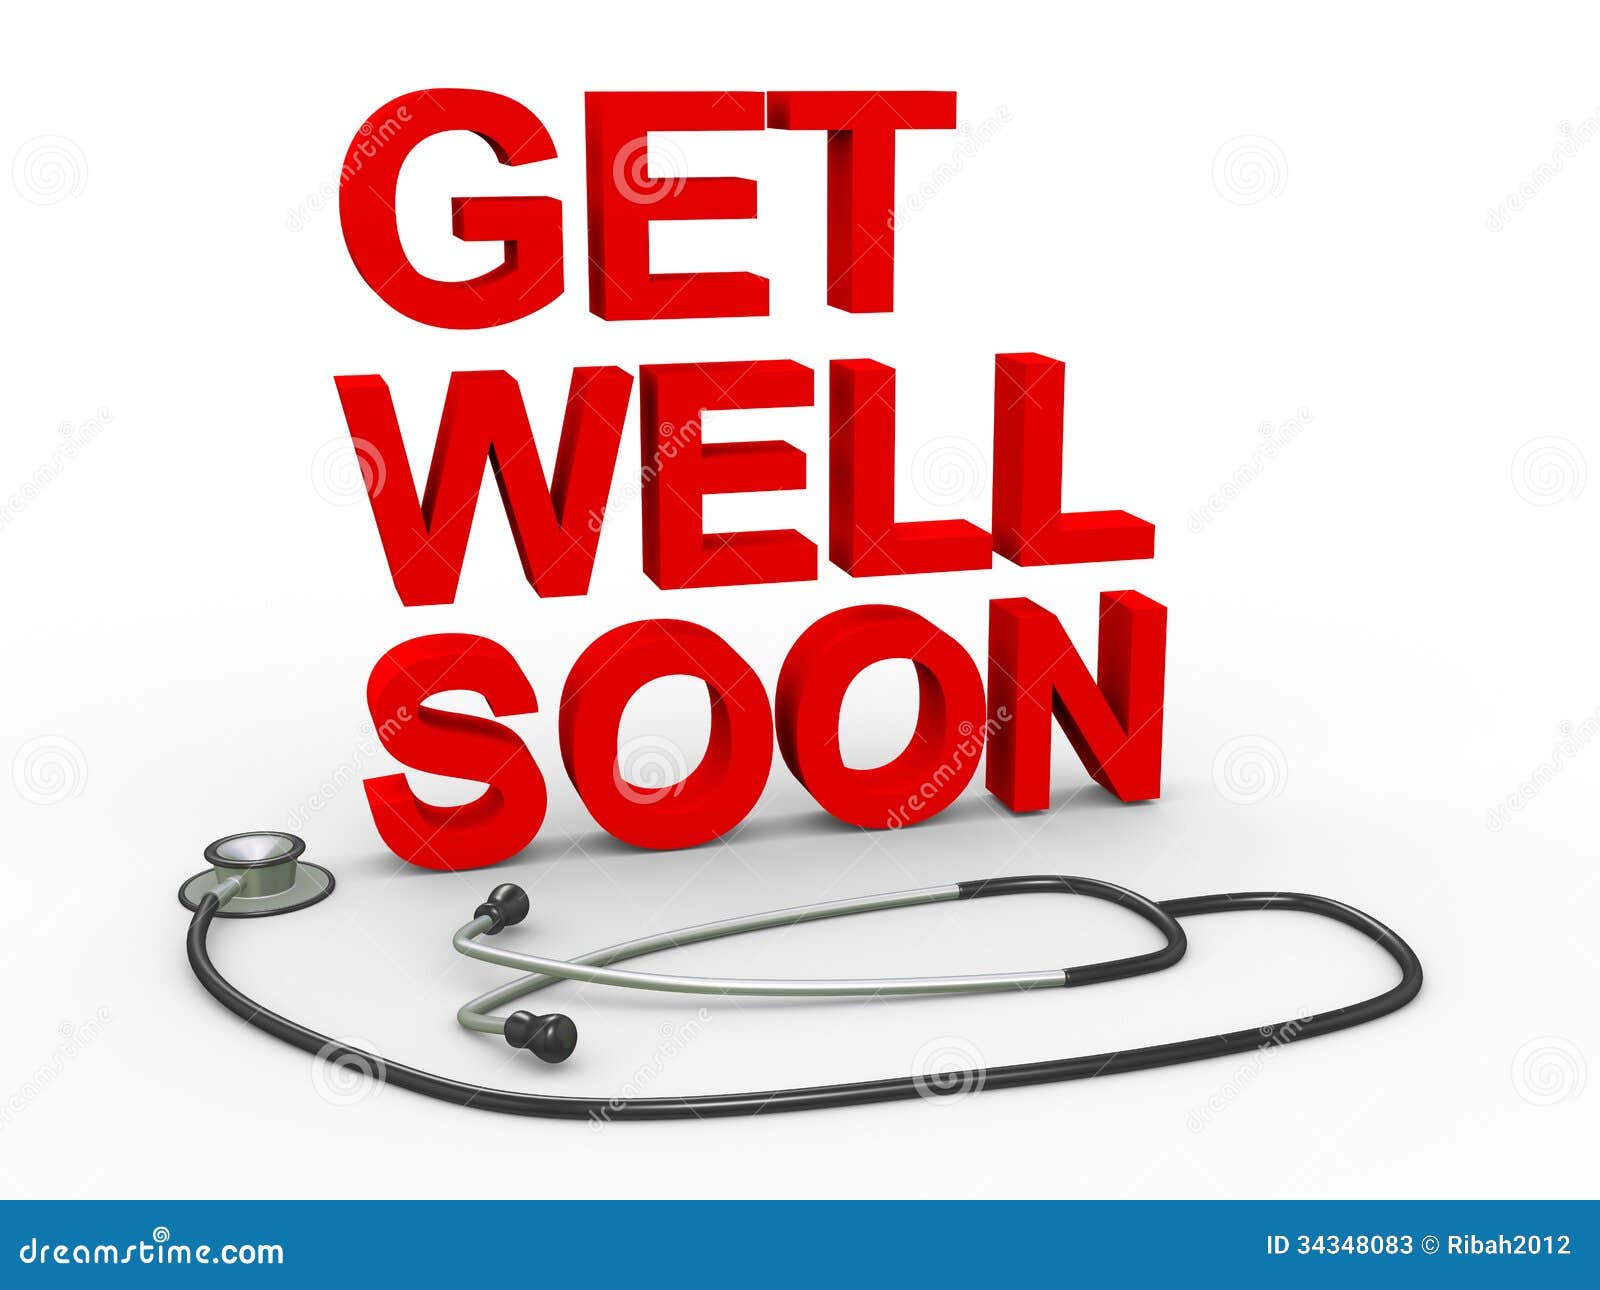 get well soon clipart - photo #40